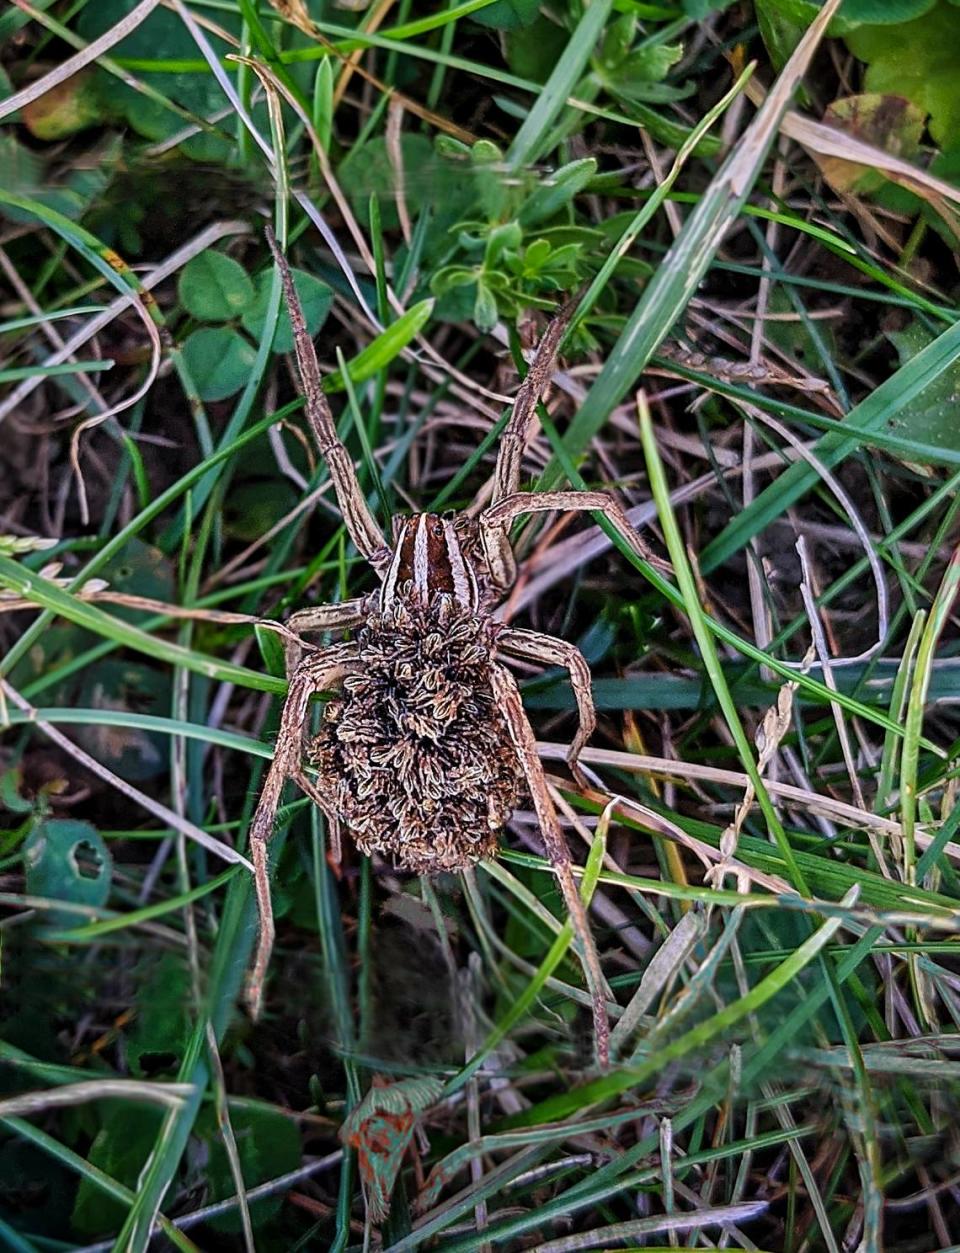 A female wolf spider carries her newly hatched offspring around on her back.